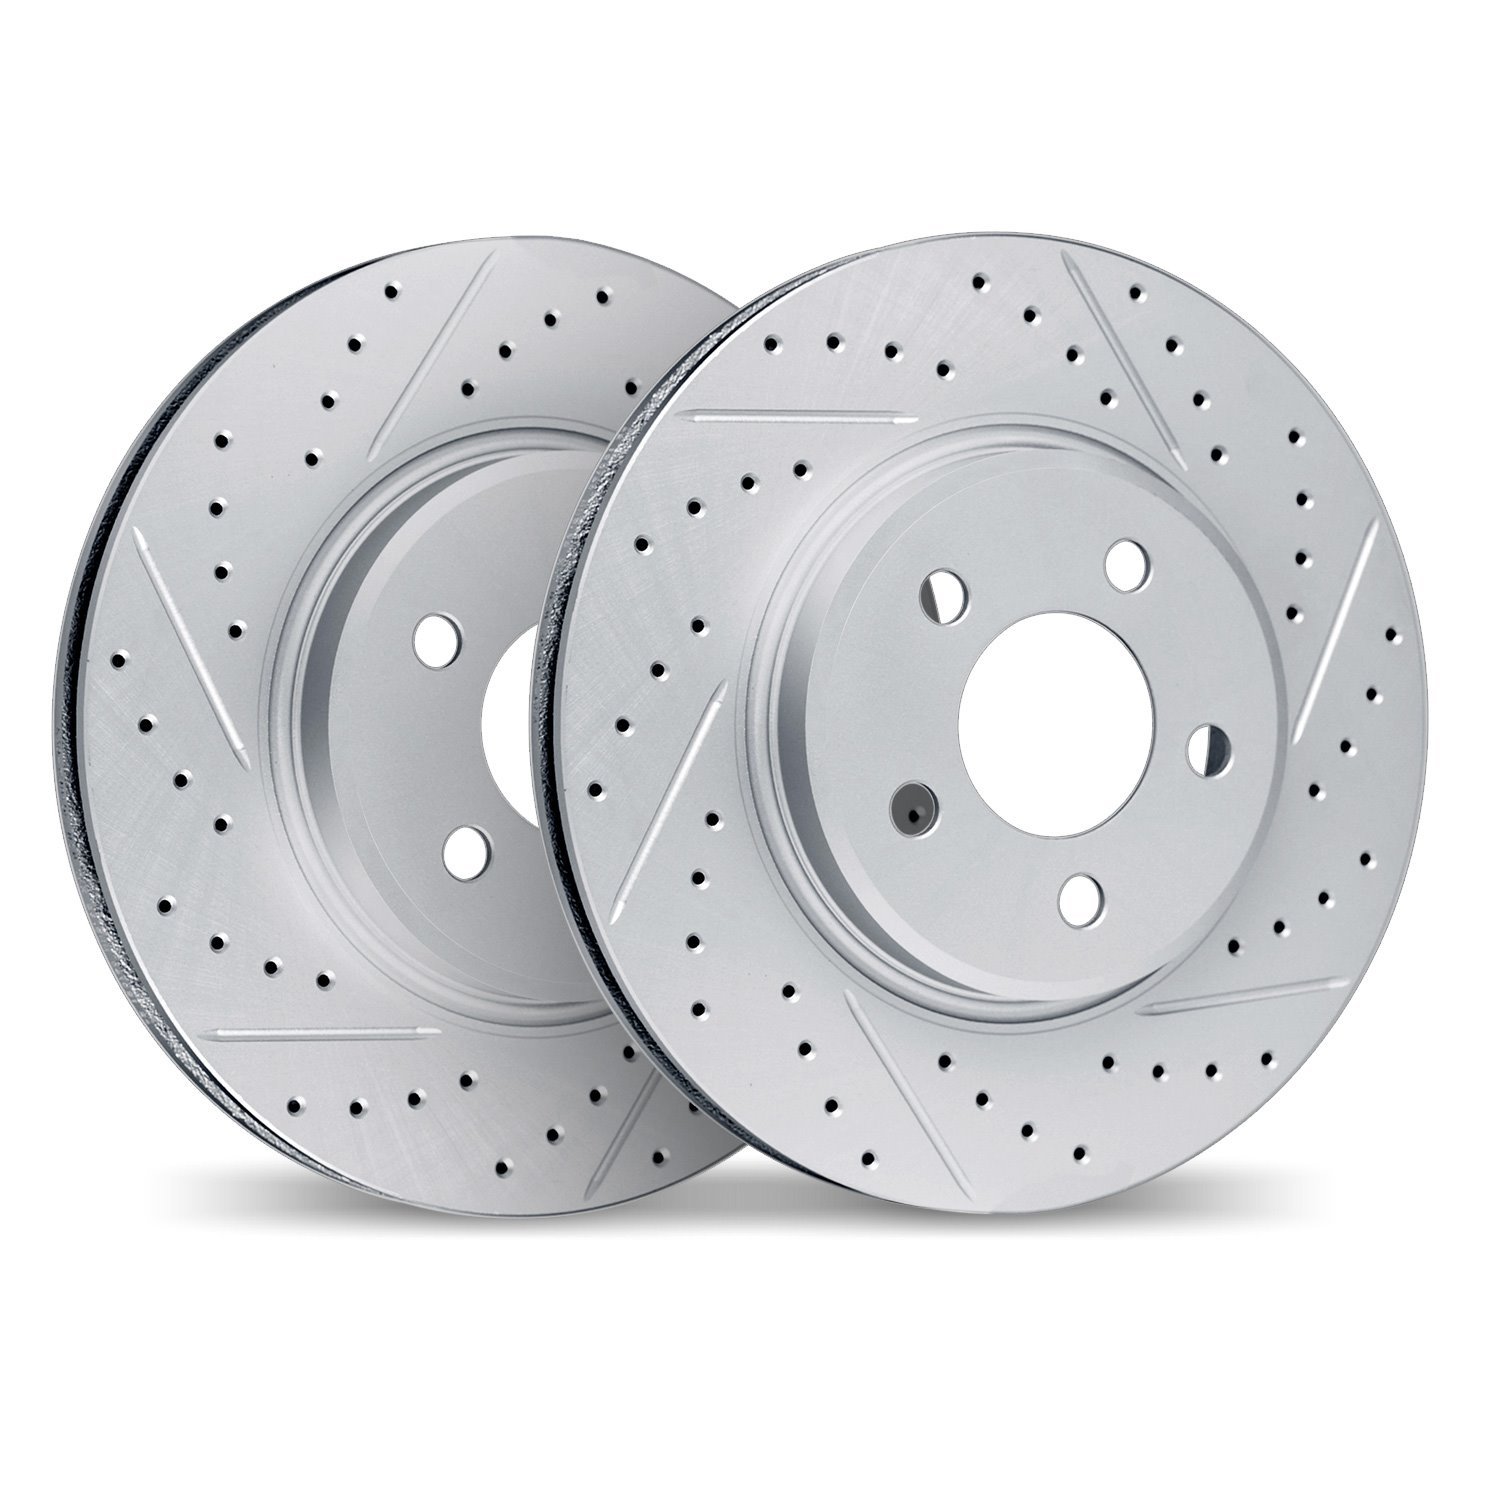 2002-63060 Geoperformance Drilled/Slotted Brake Rotors, Fits Select Mercedes-Benz, Position: Rear